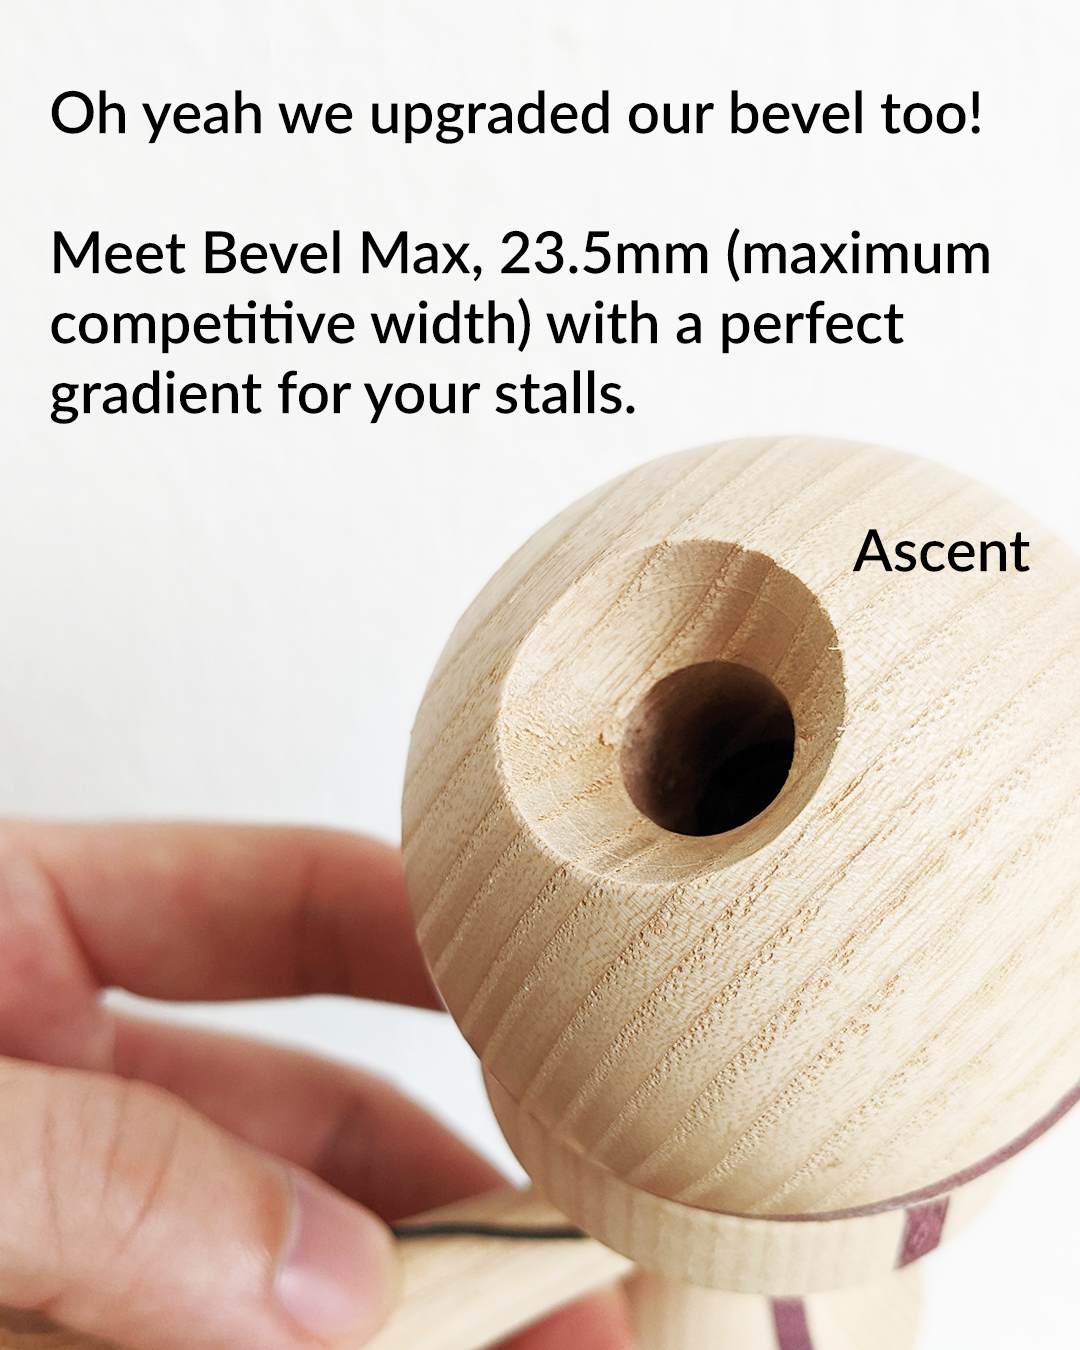 cereal kendama new bevel max